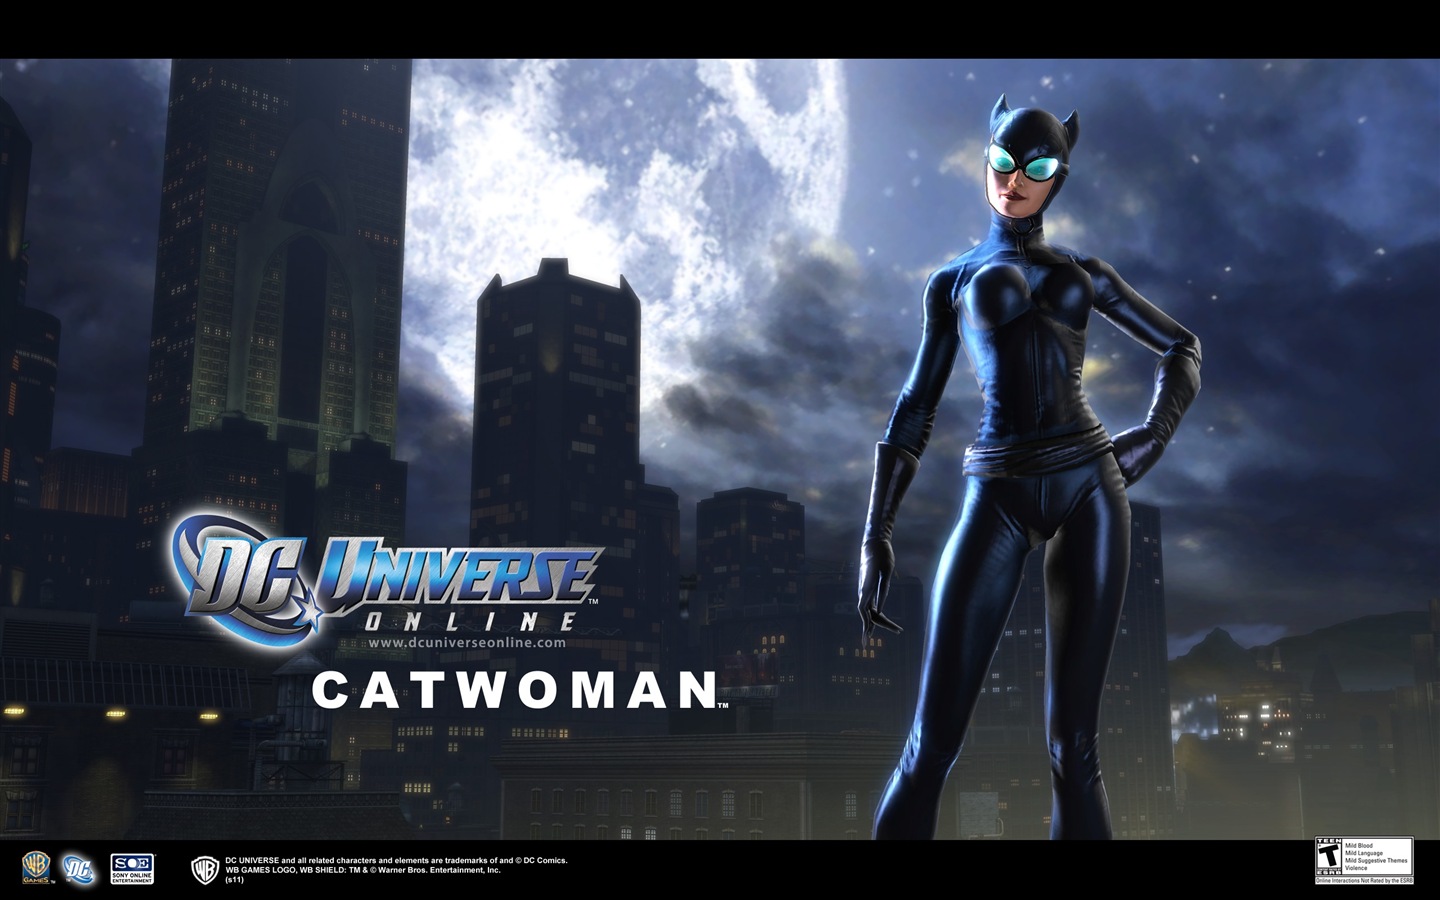 DC Universe Online HD game wallpapers #14 - 1440x900